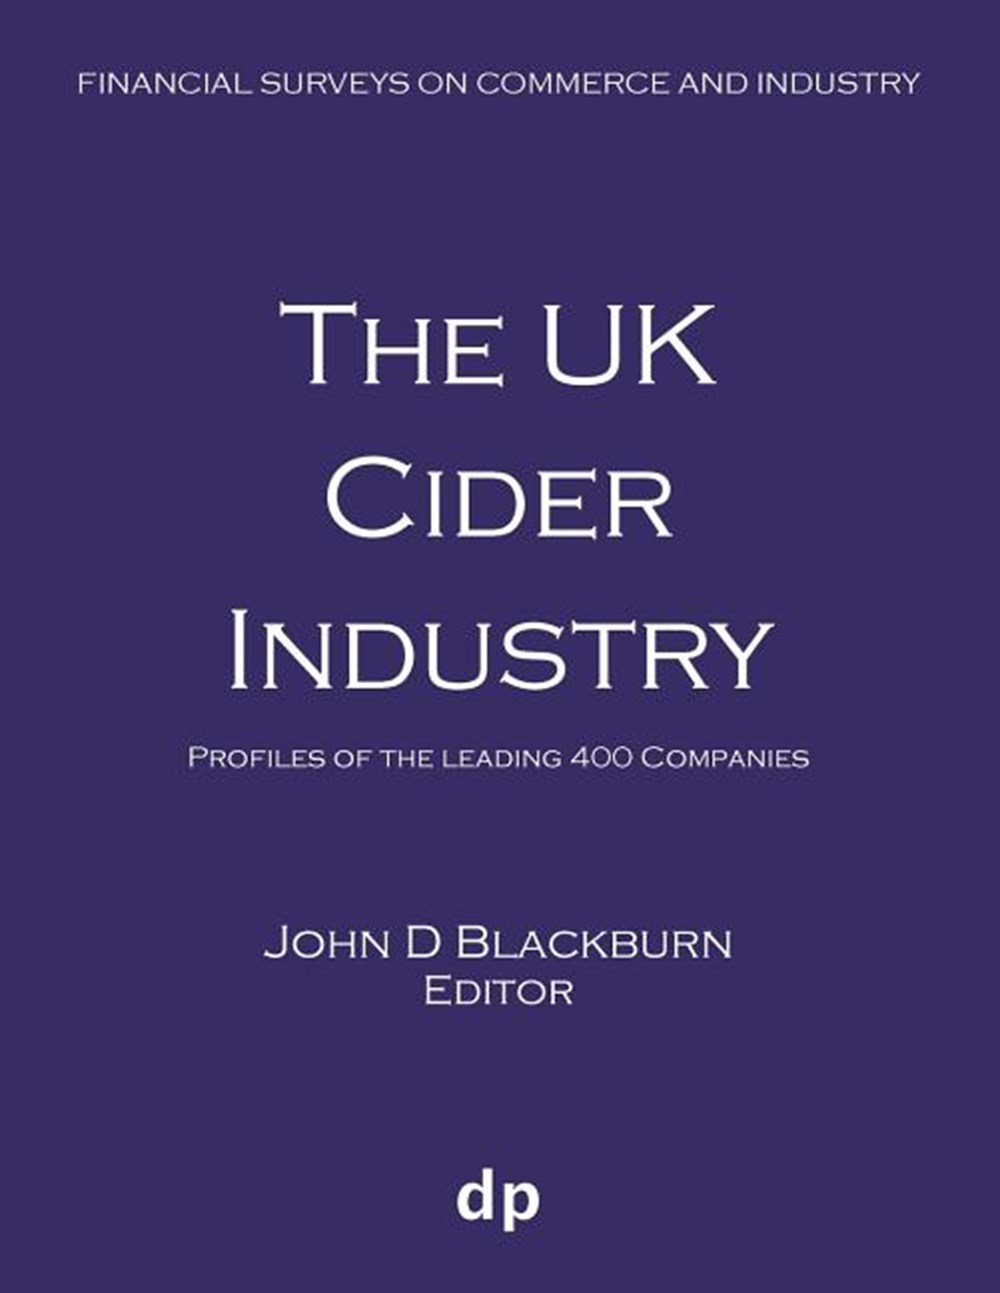 UK Cider Industry: Profiles of the leading 400 companies (Spring 2019)